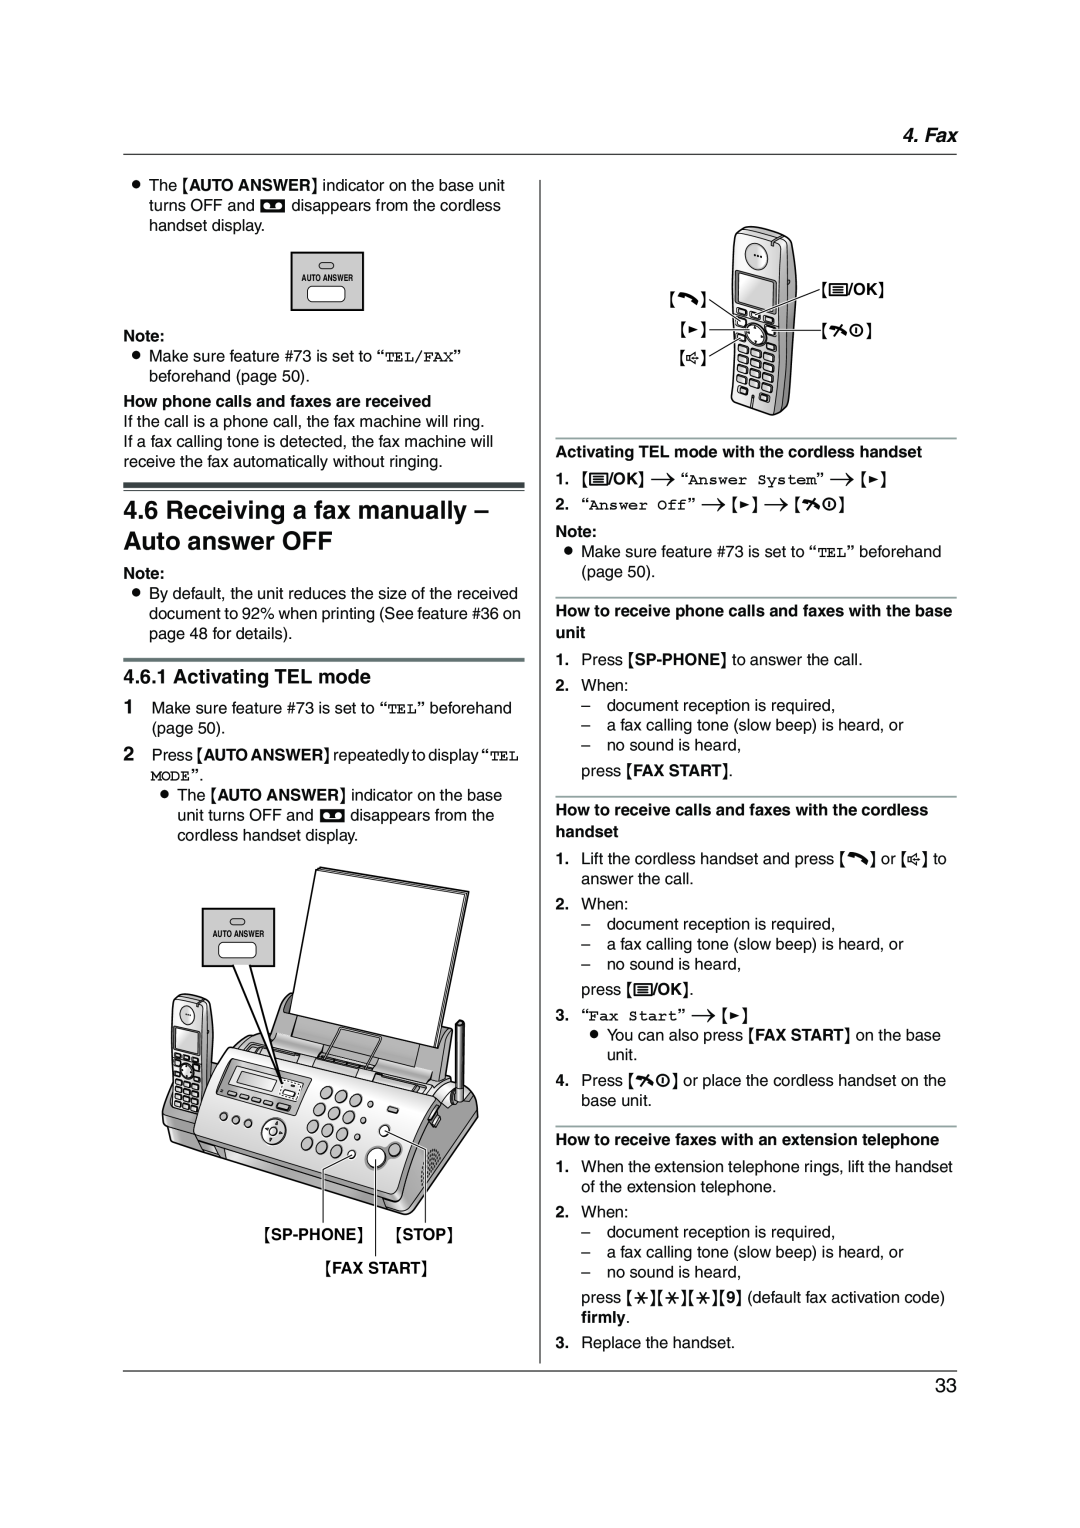 Panasonic KX-FC228HK Receiving a fax manually - Auto answer OFF, Activating TEL mode, 3. “Fax Start” 